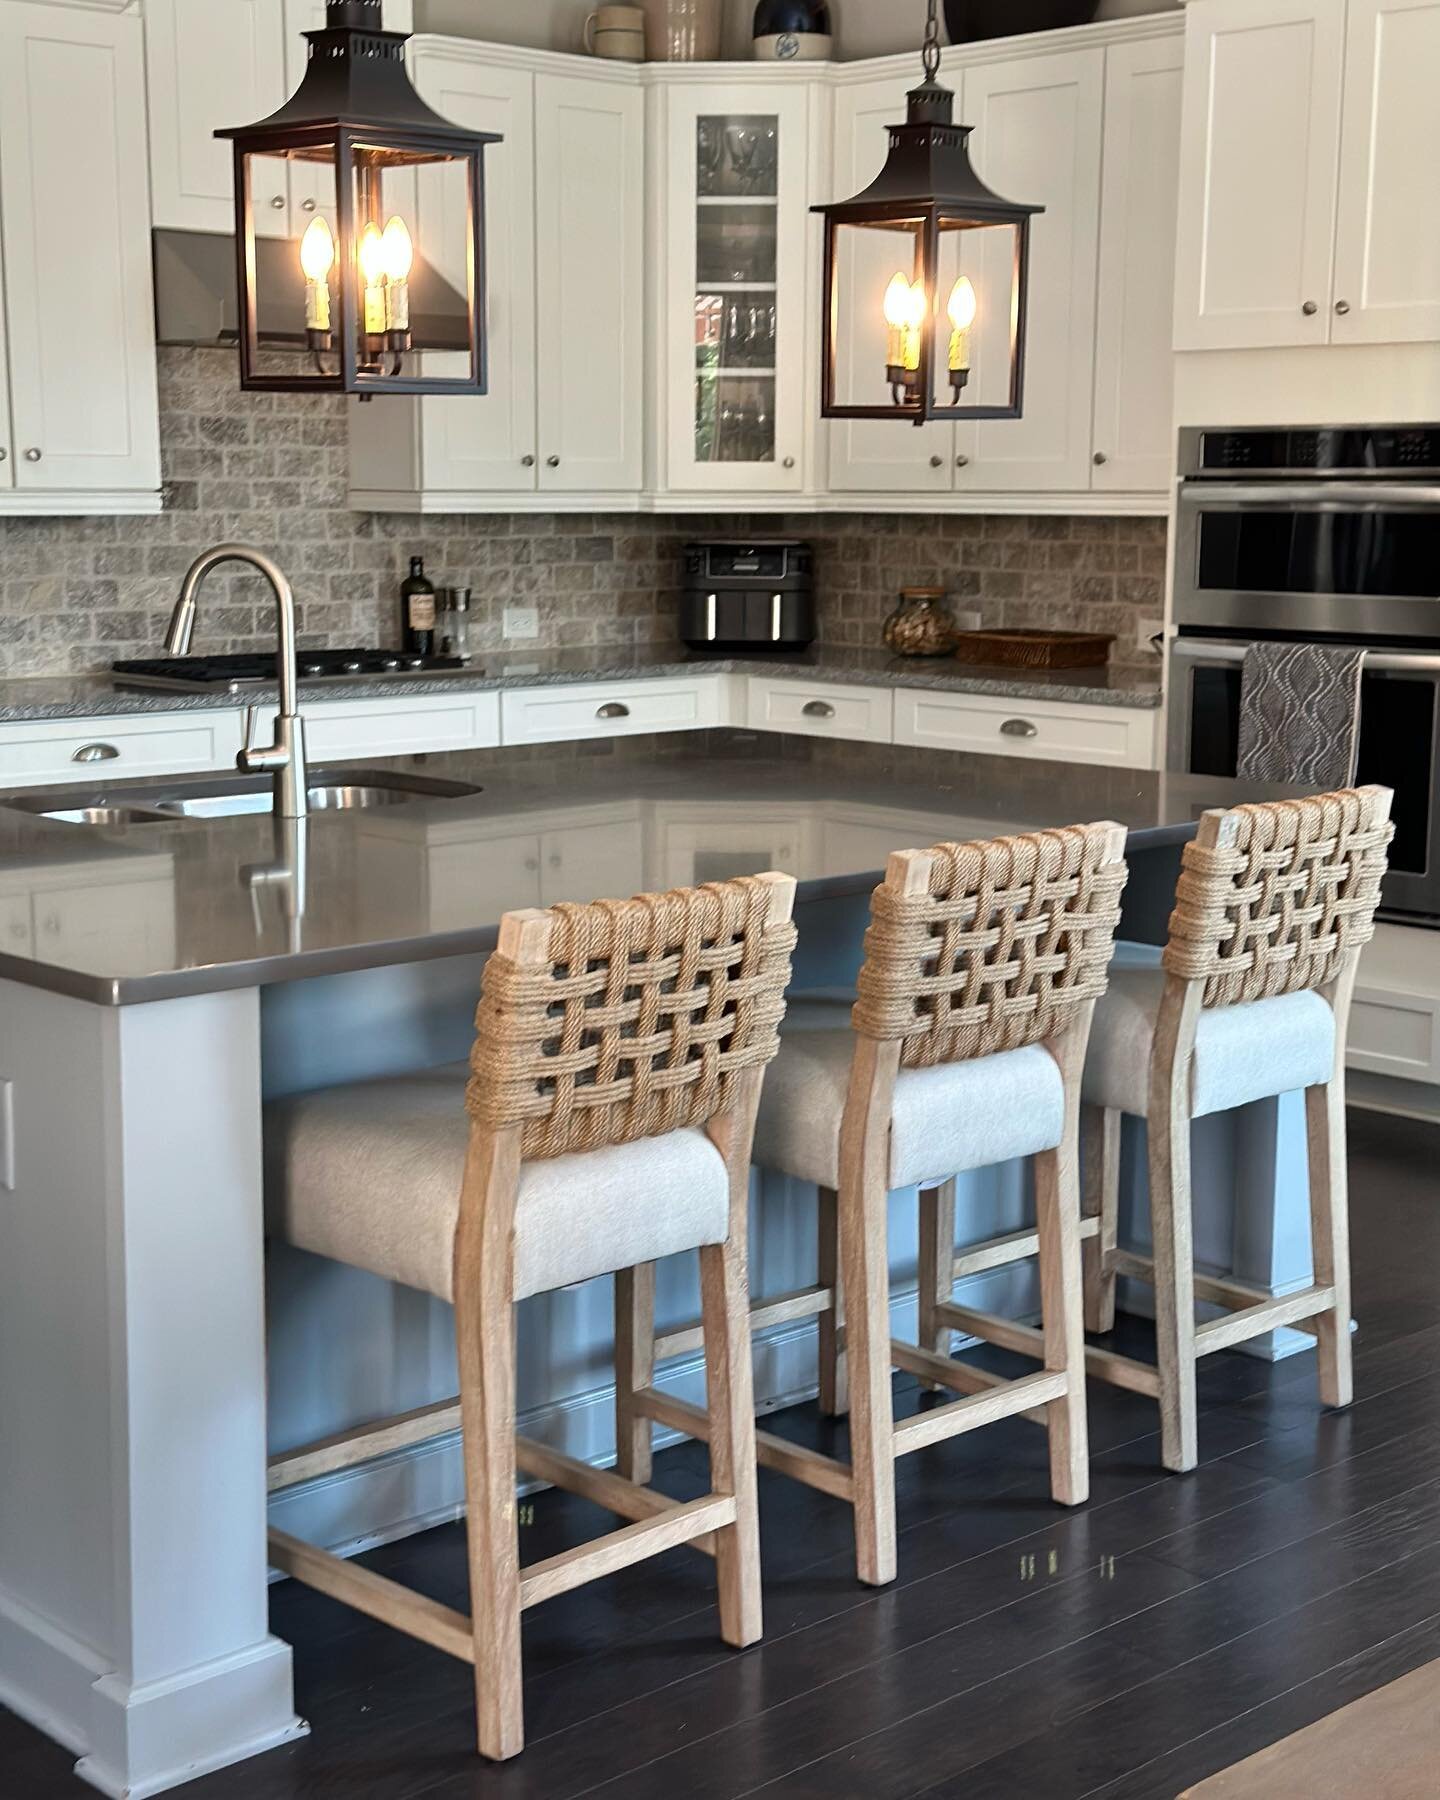 Elevate your kitchen island with our new Maya counter stools. We give them 5⭐️&rsquo;s for their comfort, style, quality, &amp; durability. Loving the warmth and texture they bring to this beautiful kitchen!